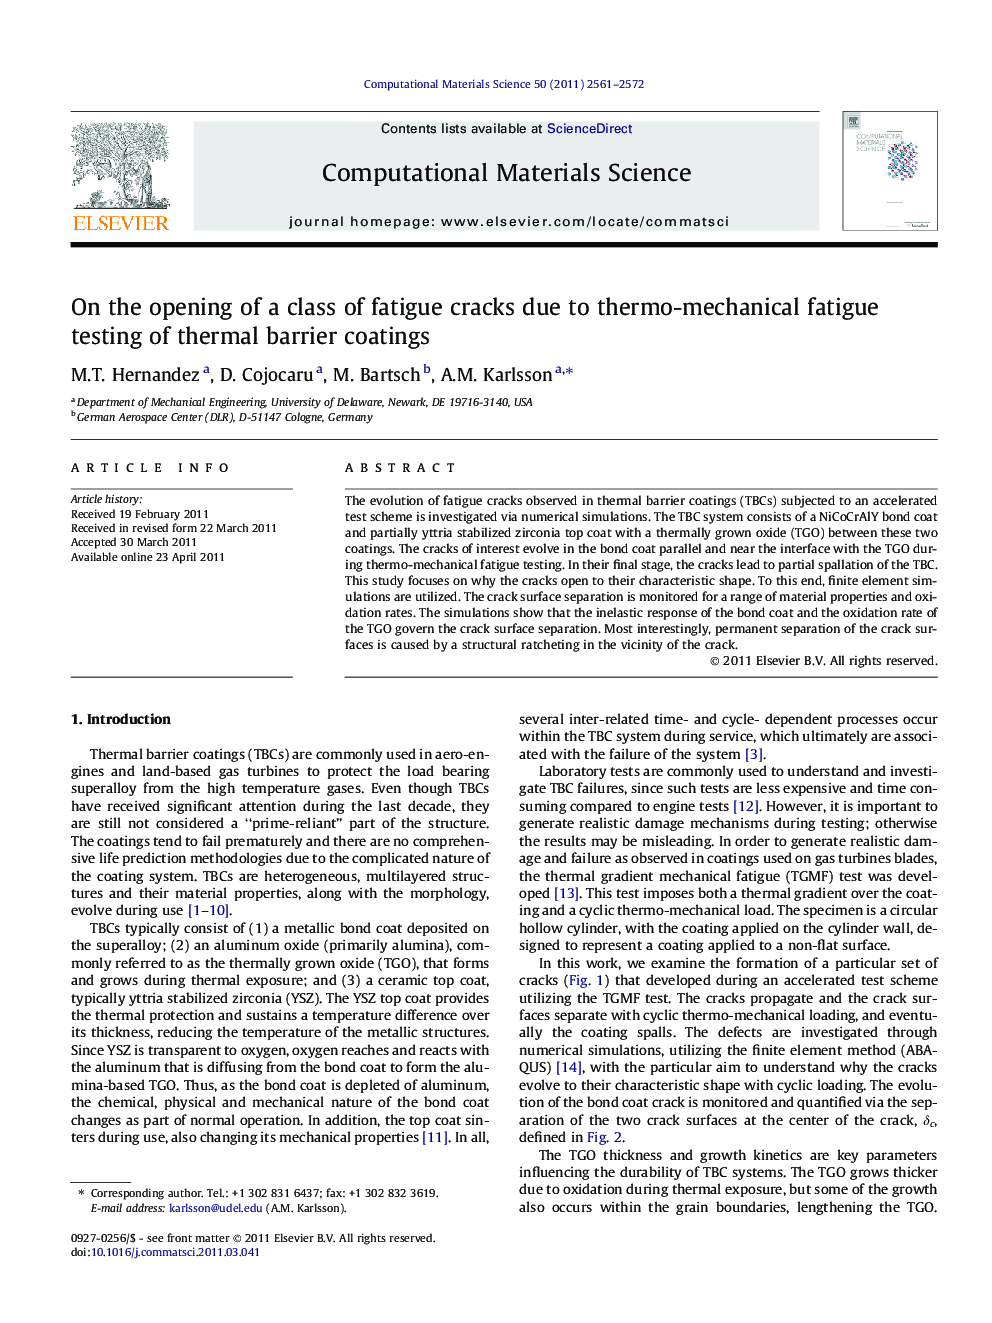 On the opening of a class of fatigue cracks due to thermo-mechanical fatigue testing of thermal barrier coatings